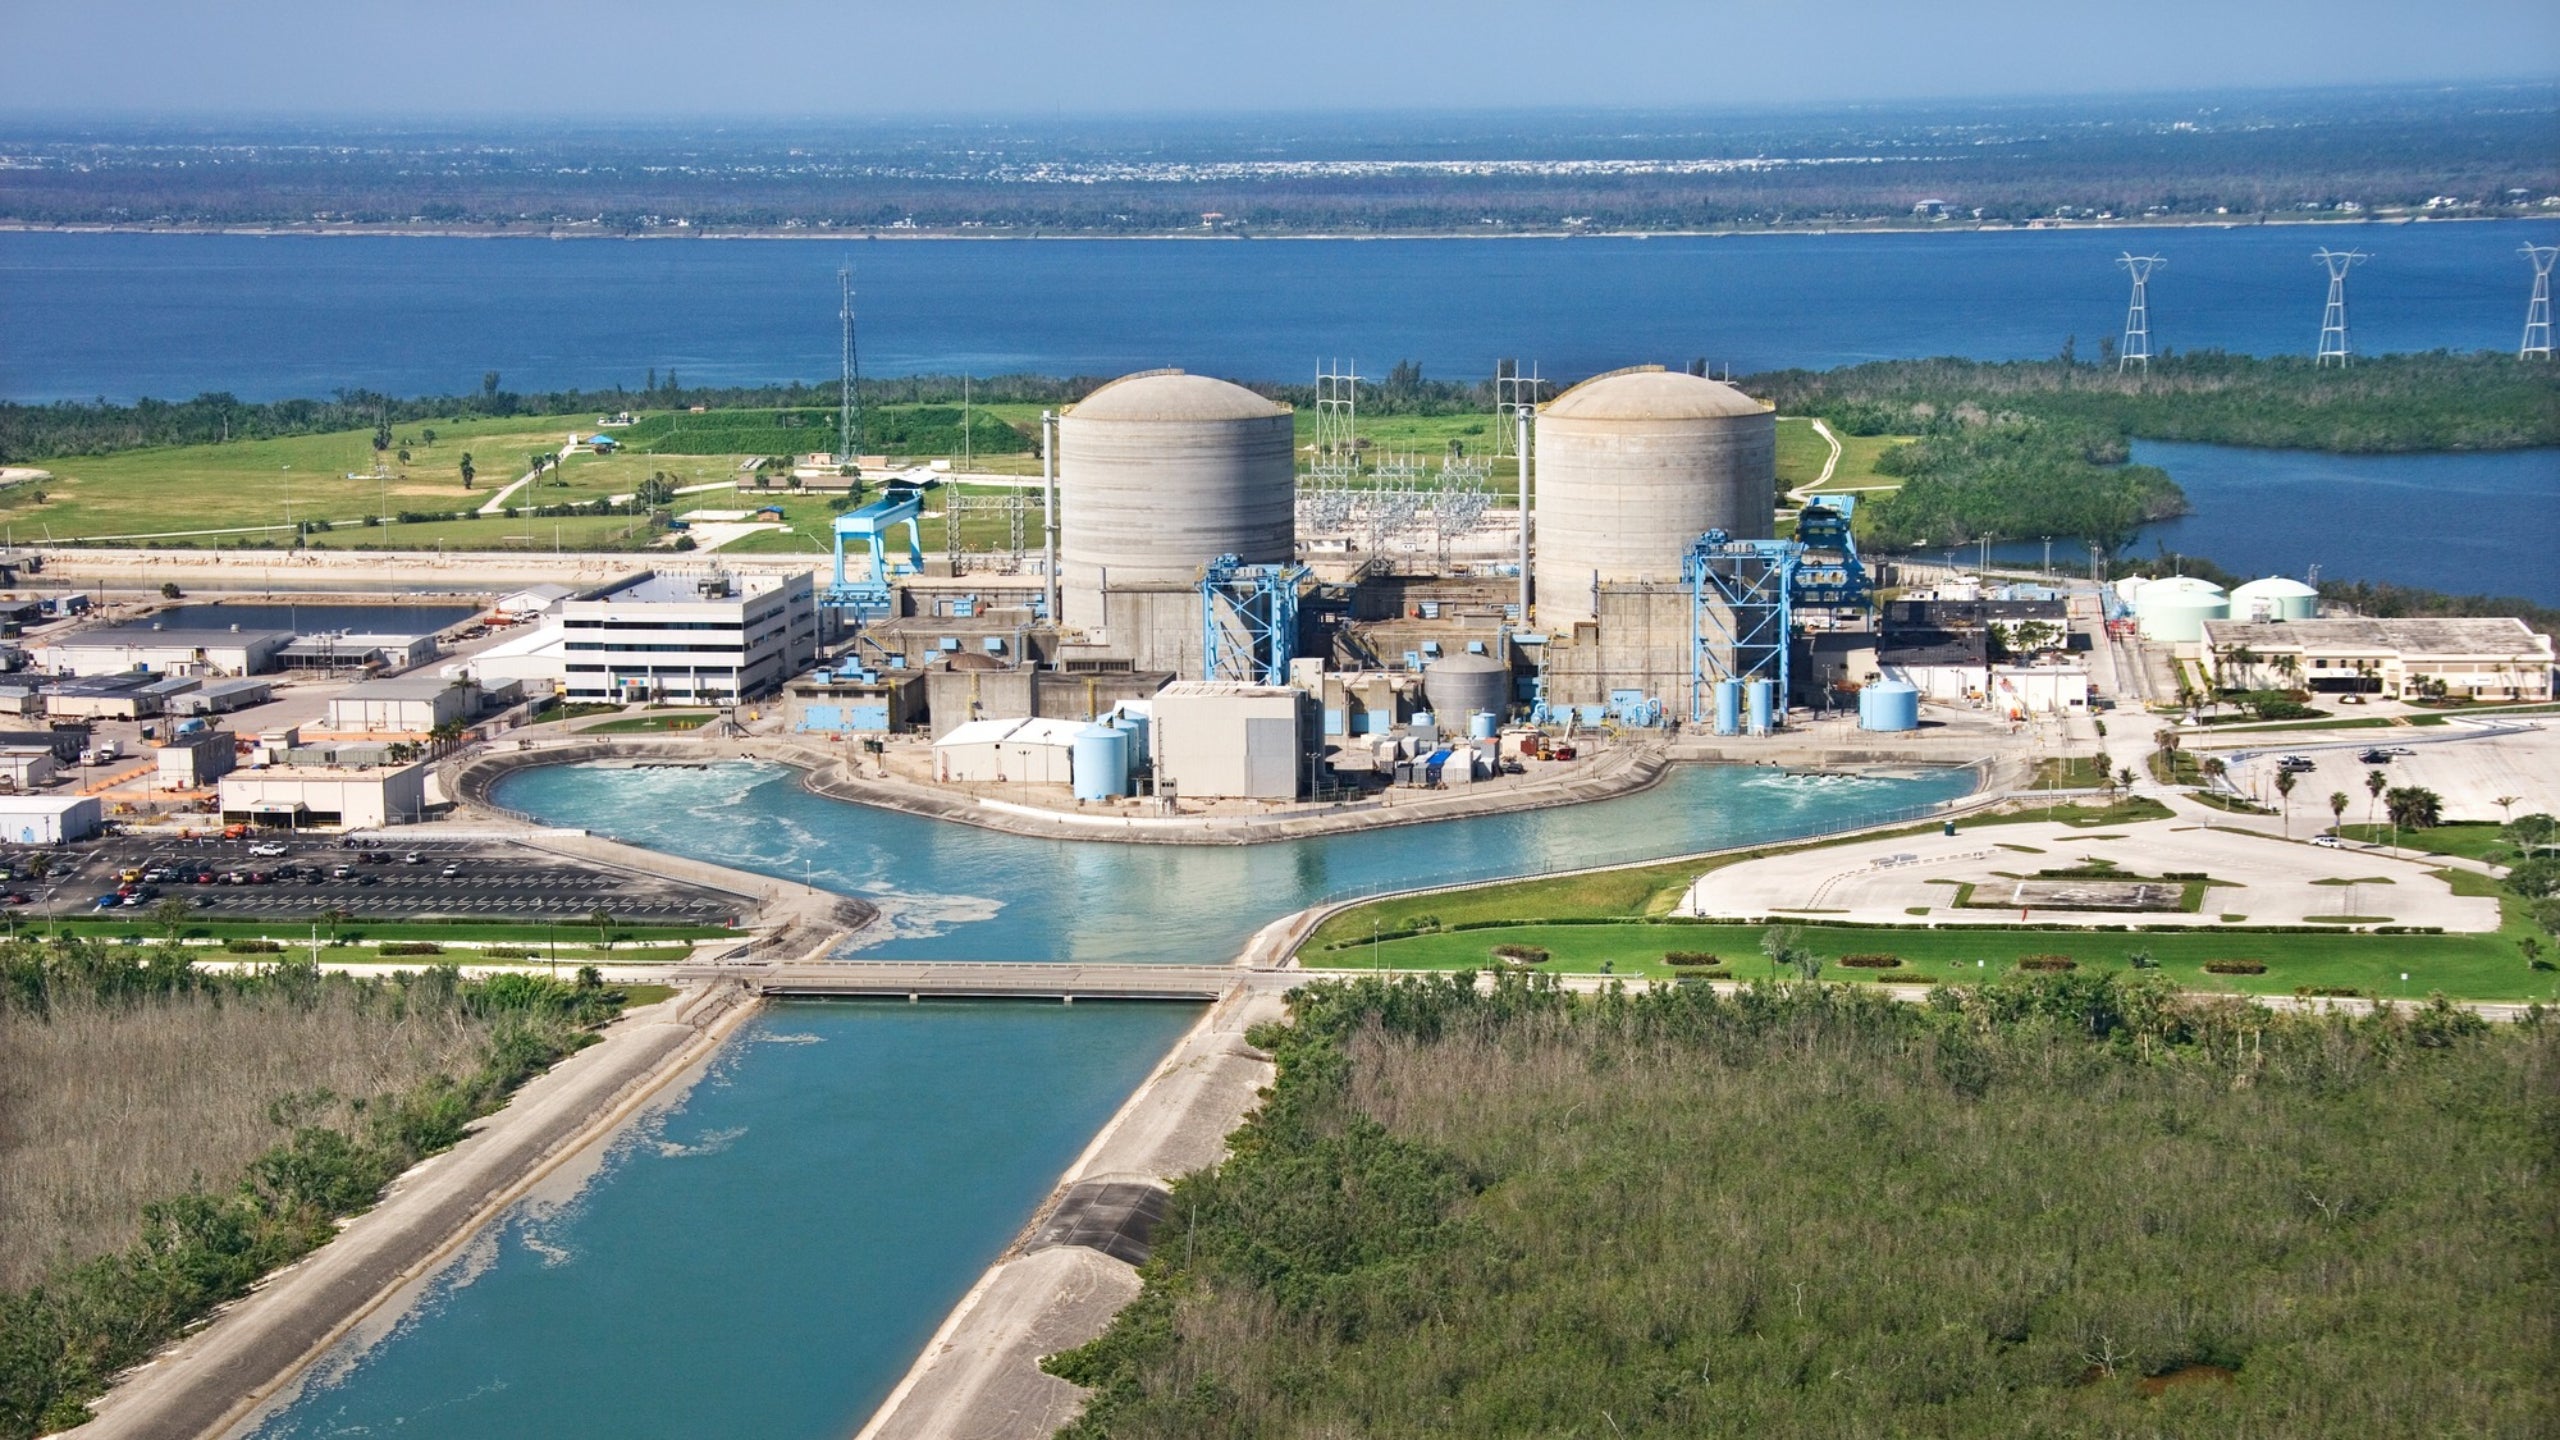 The US public is warming to the thought of nuclear energy